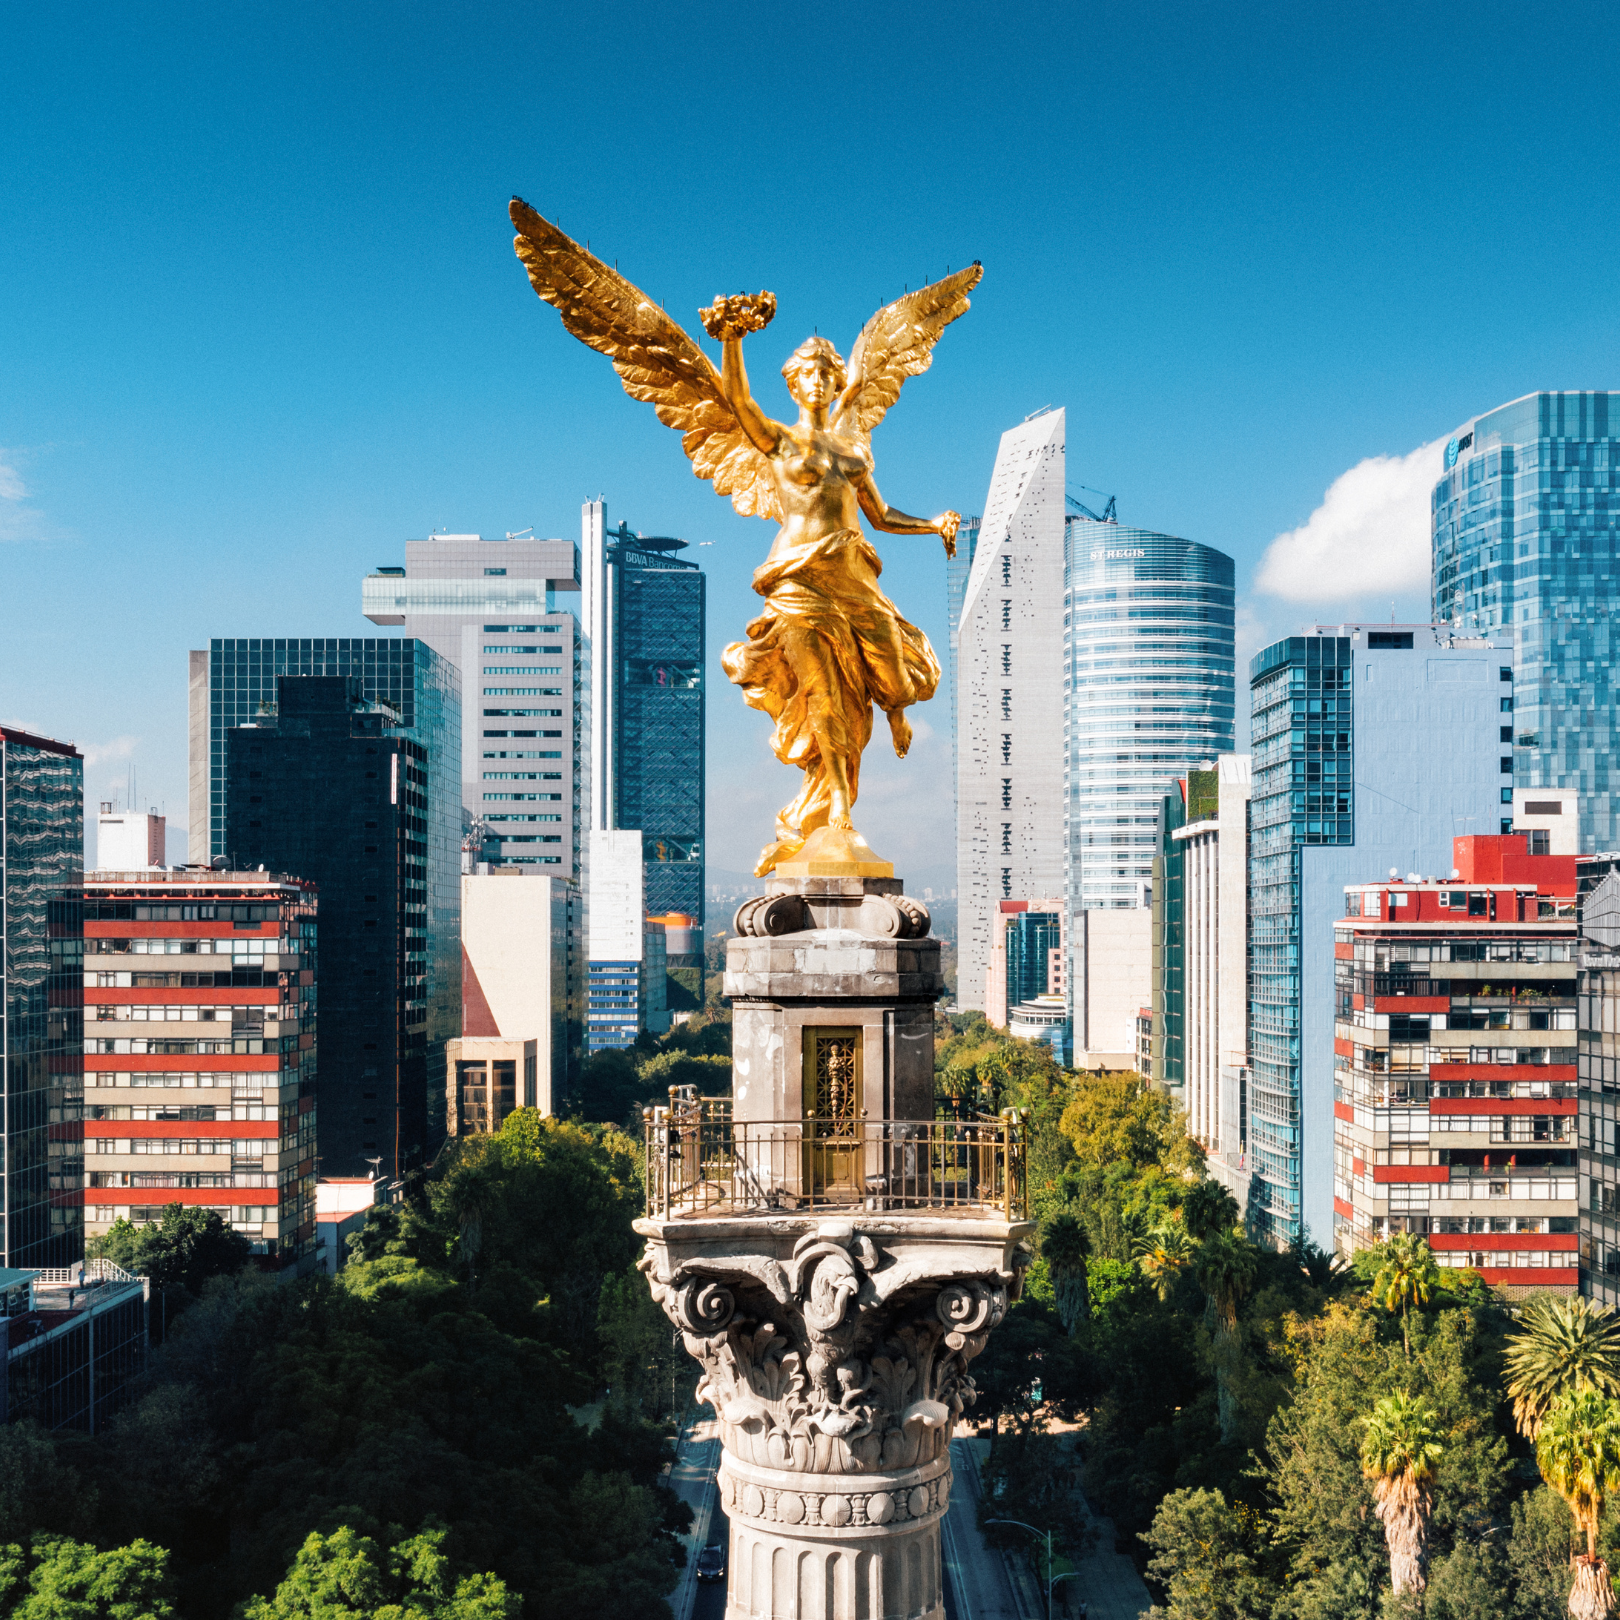 Managing Partner, Alley Global Advantage.. Mexico City Angel Statue in gold.